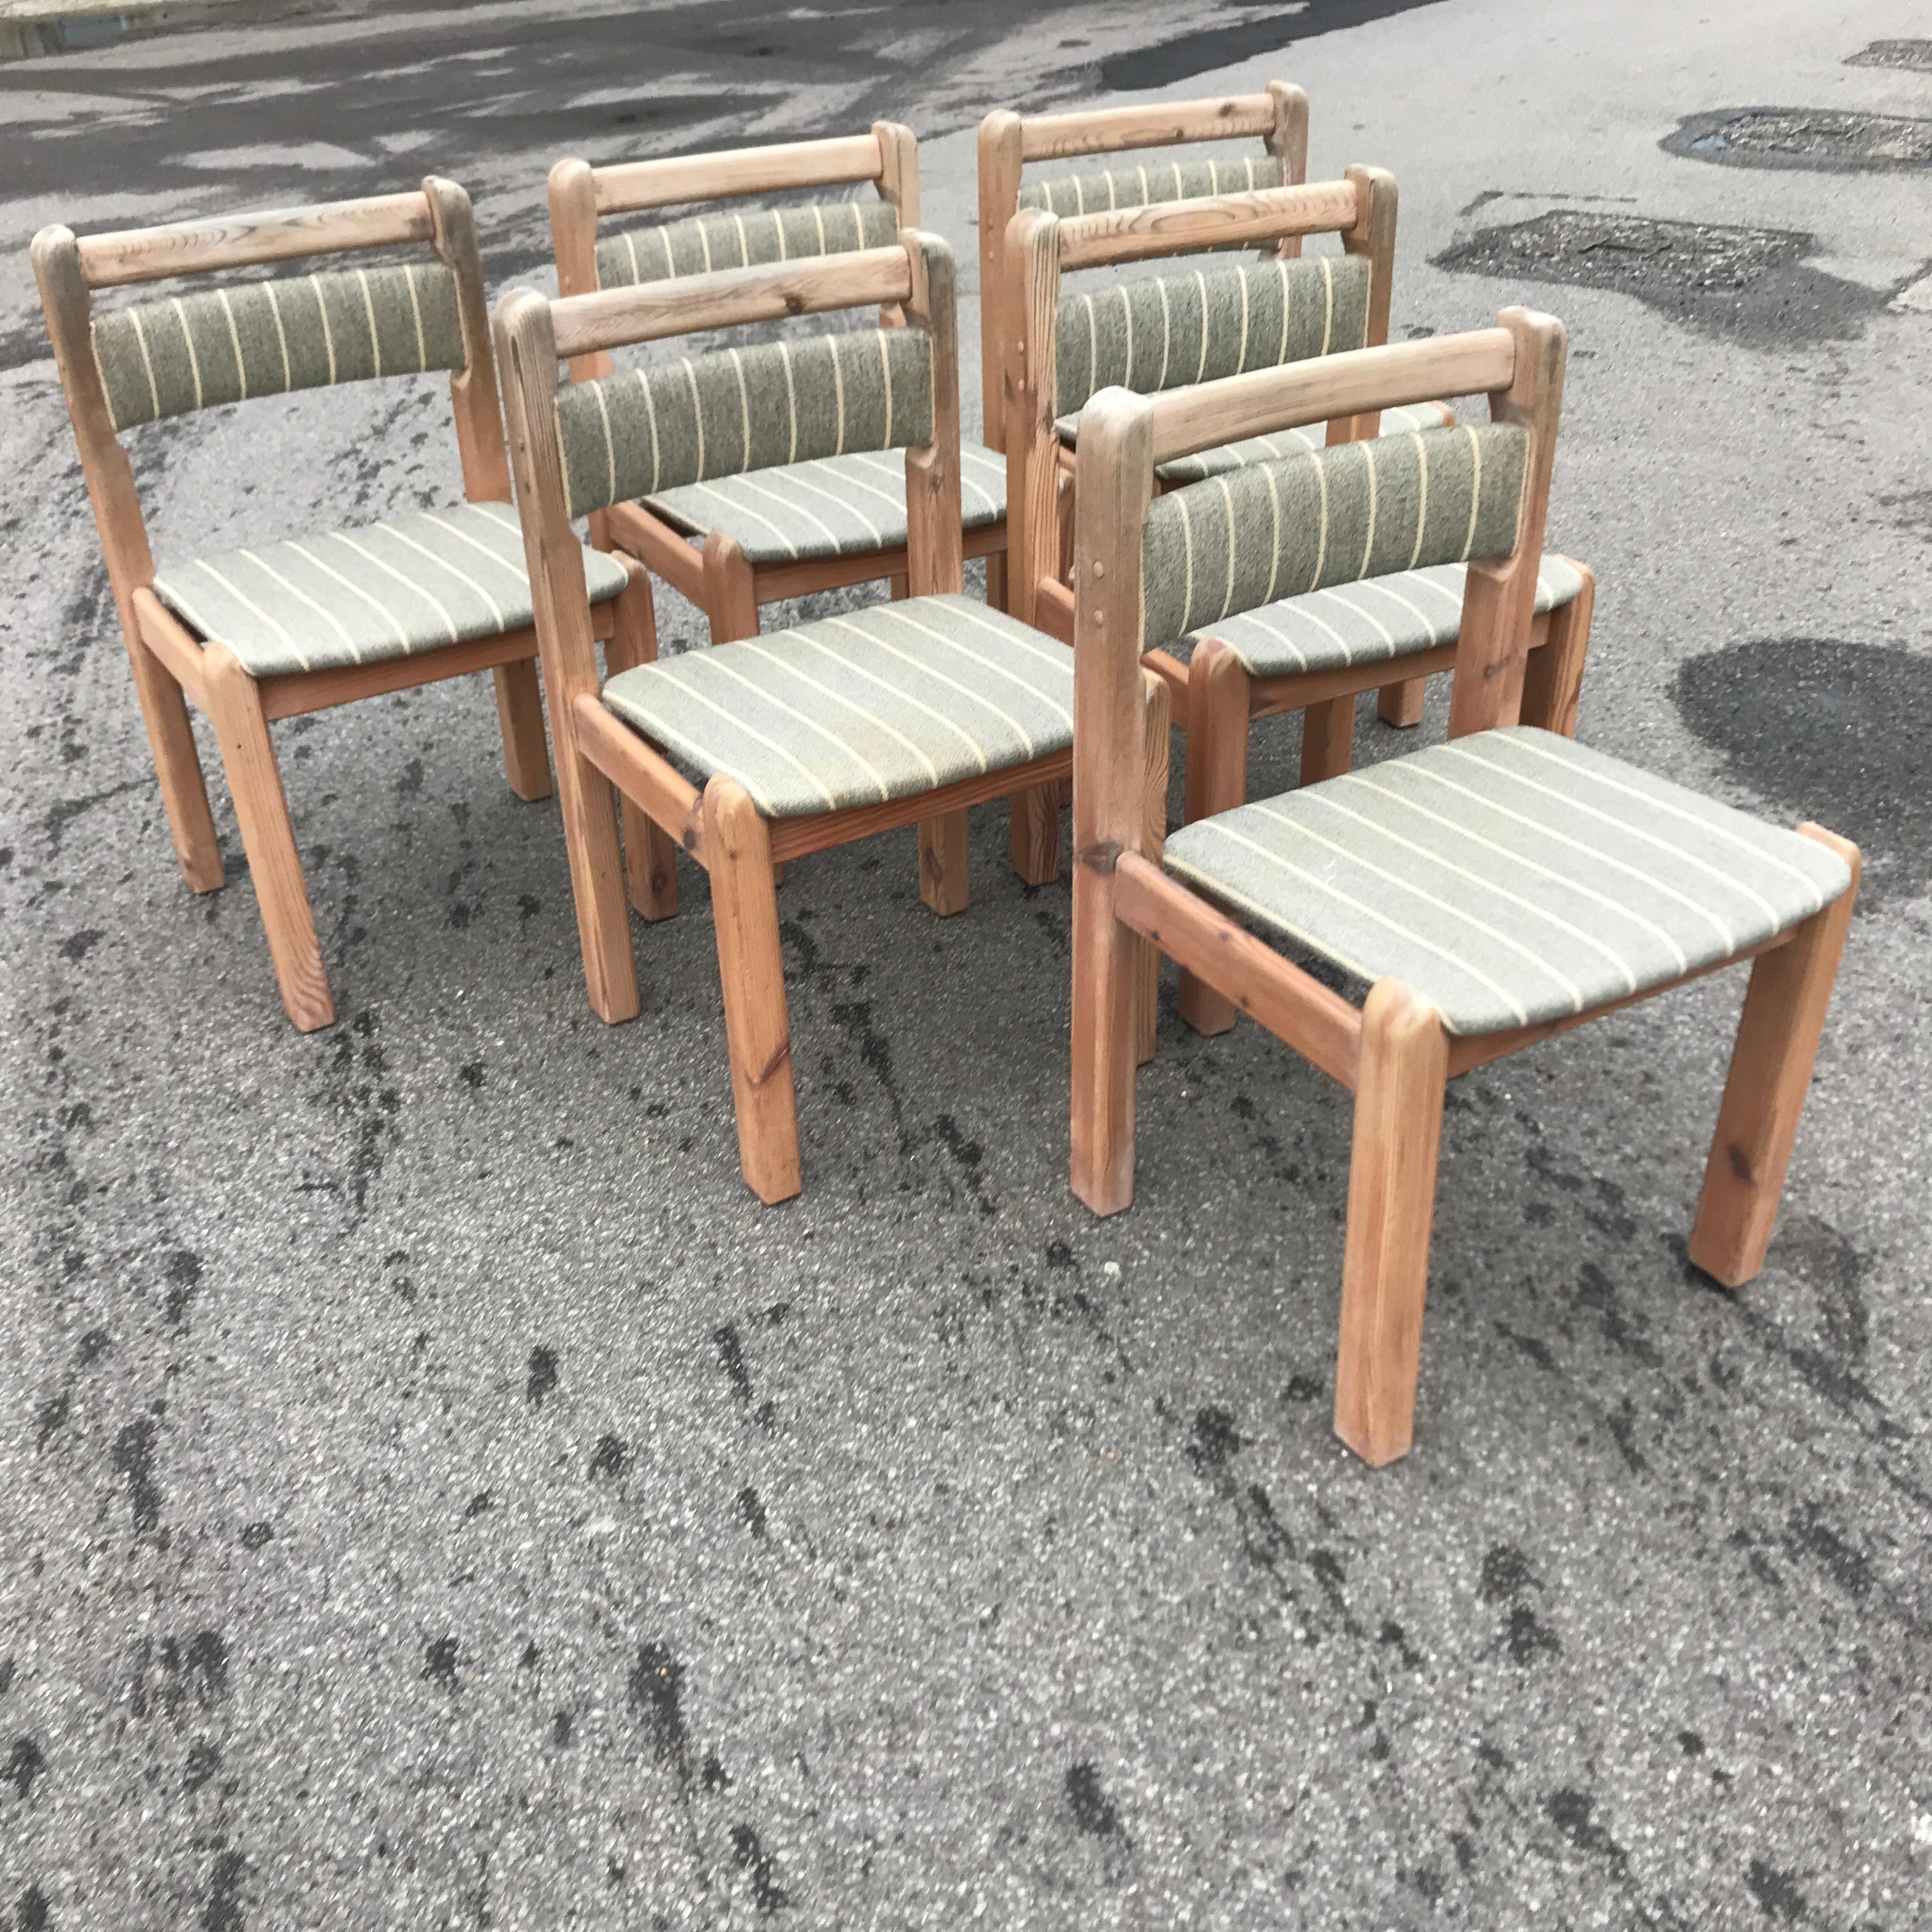 Strong white pigmented pine chairs Danish design from 1970s.